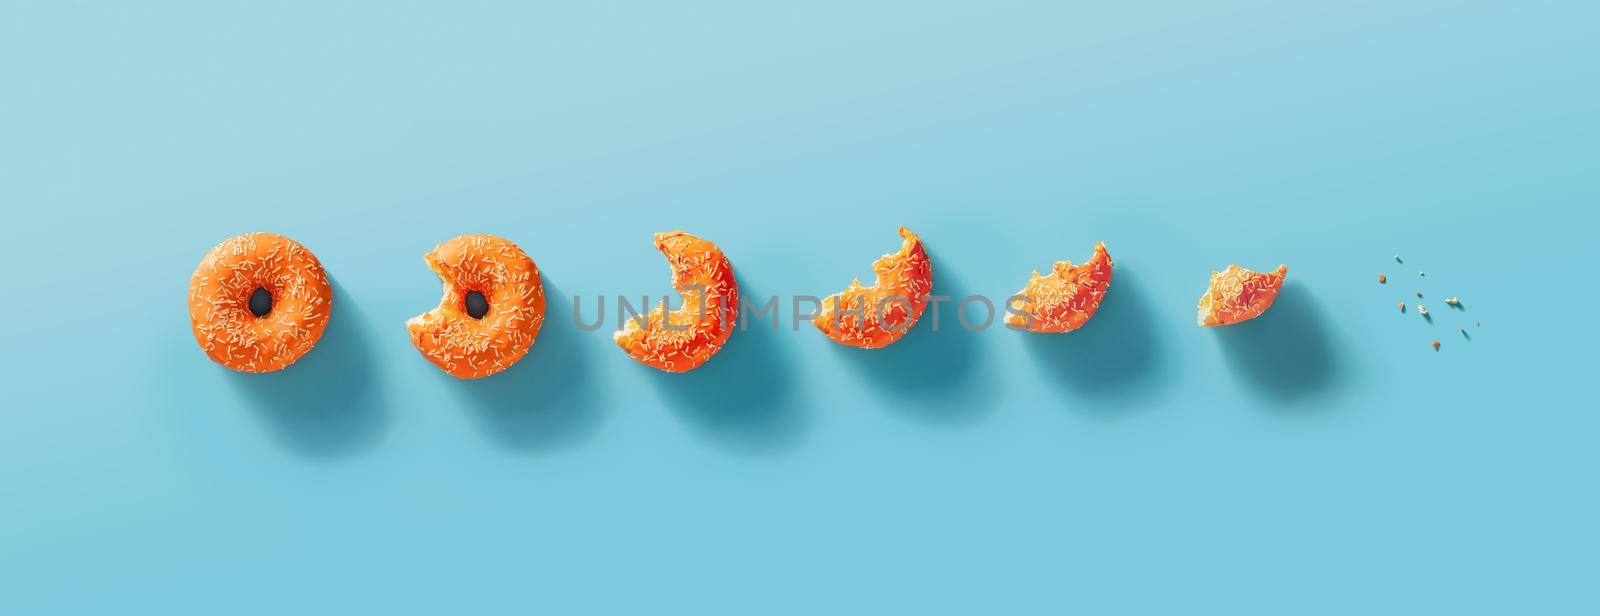 Seven stages of donut biting or eating down to crumb. Eaten donut with orange glaze and white sprinkles on blue background. Top view or flat lay. Horizontal banner